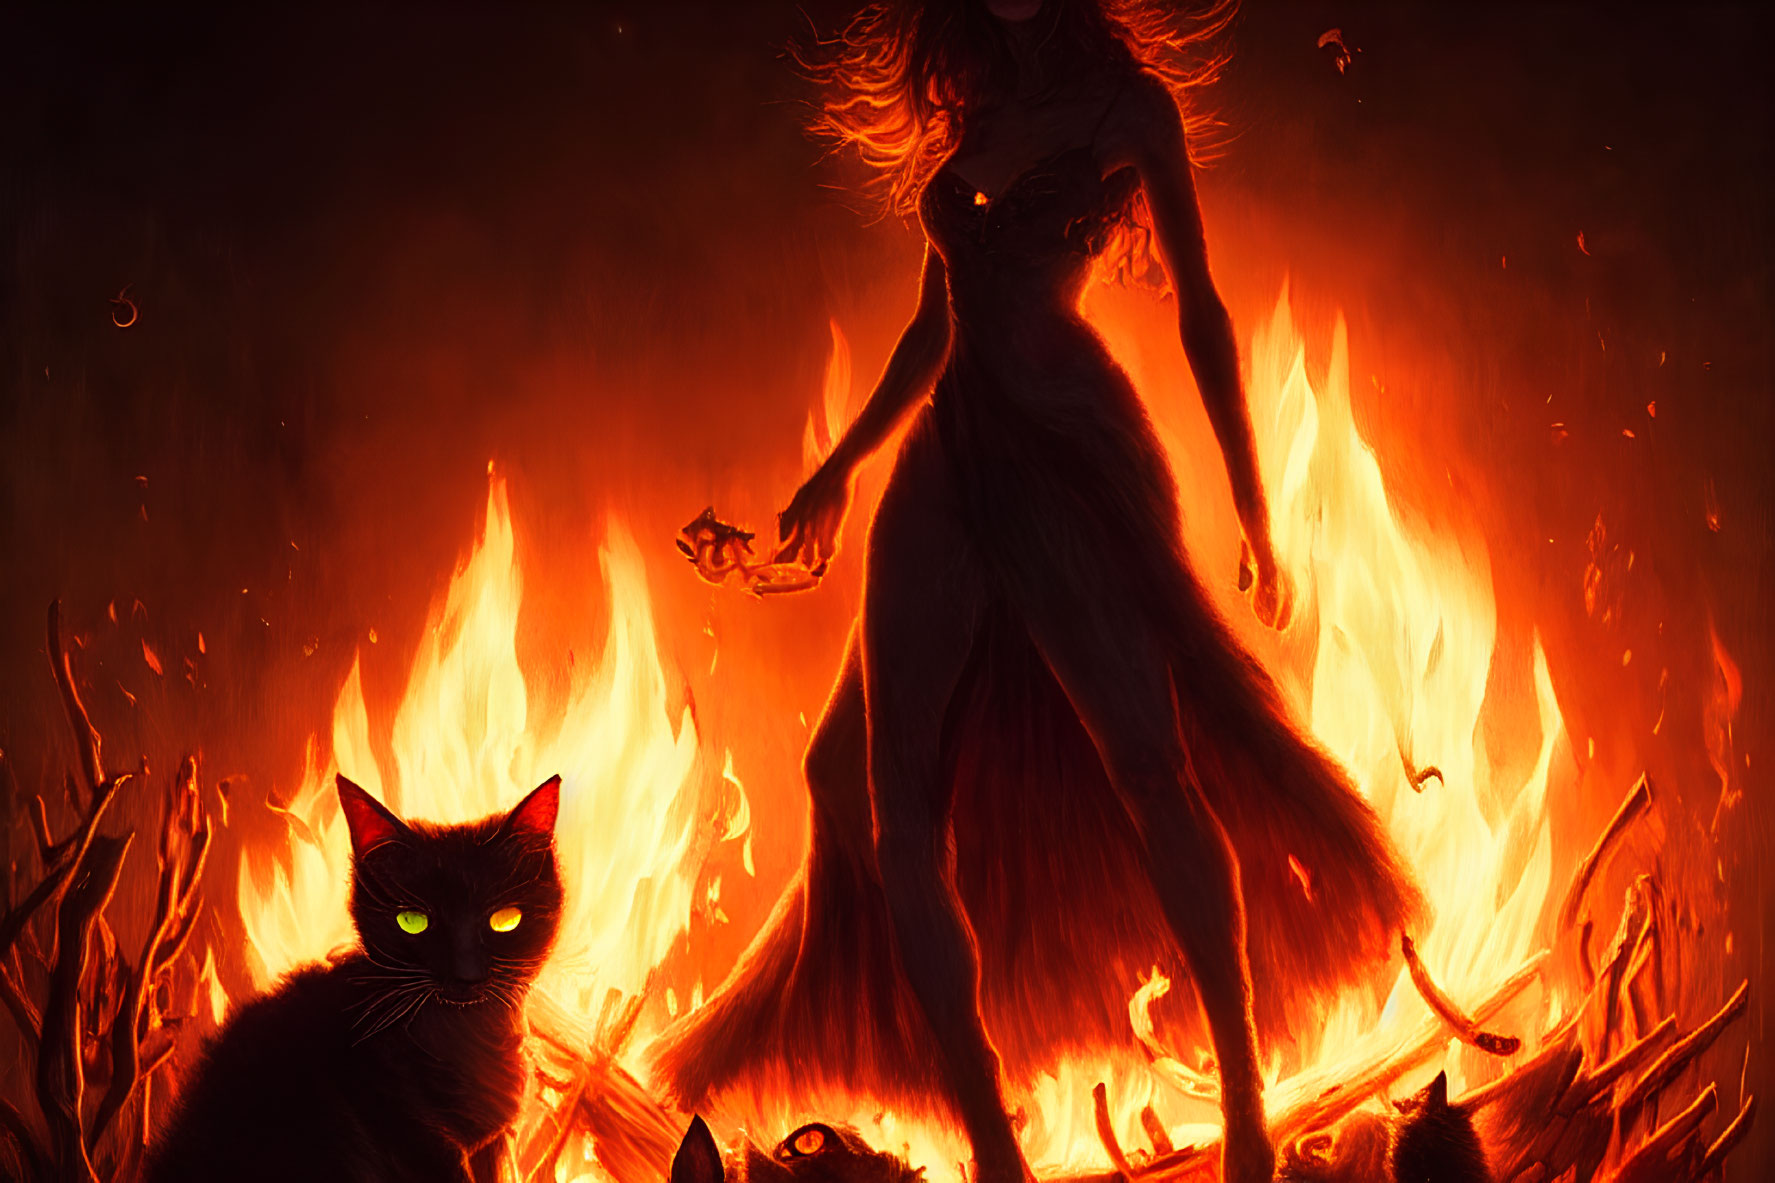 Woman surrounded by flames and glowing-eyed cats in mystical scene.